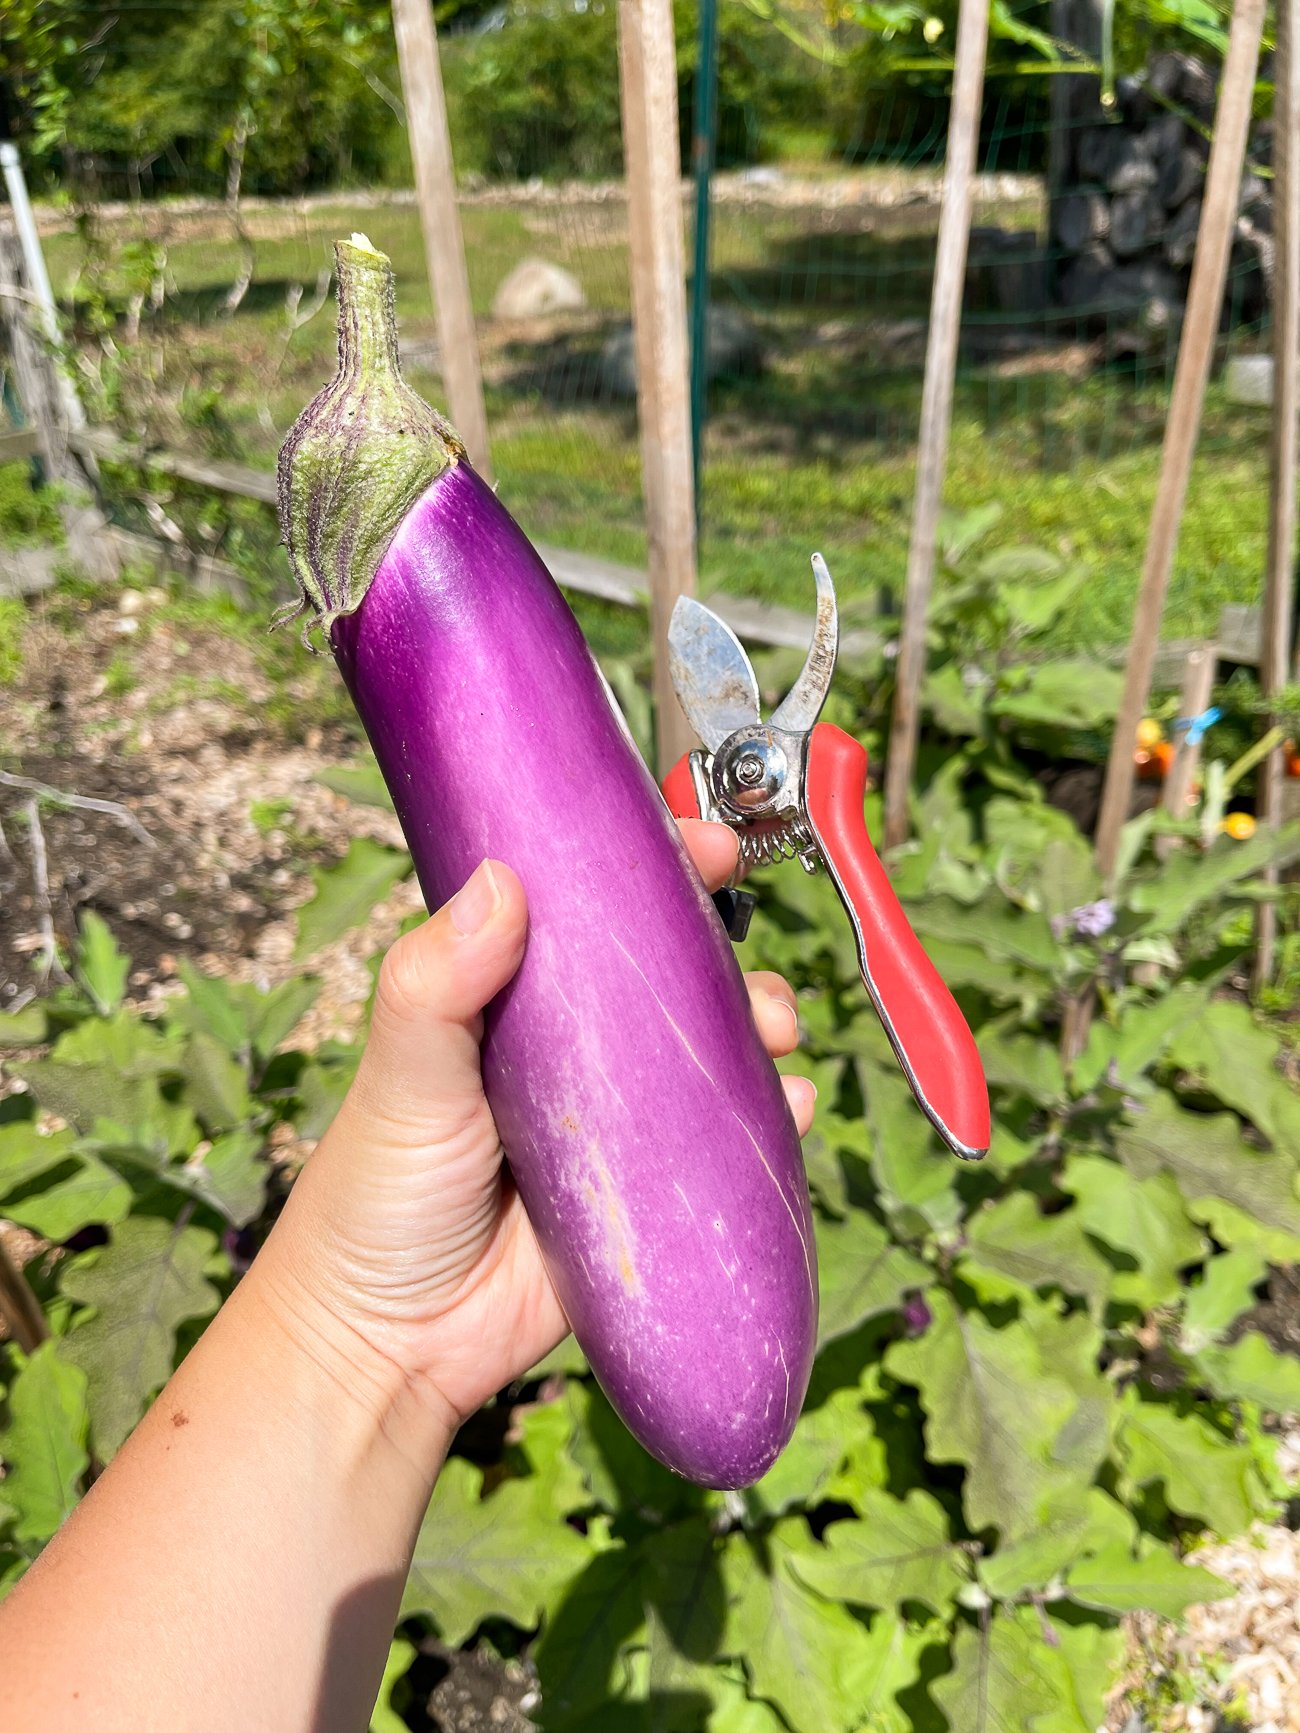 holding a just harvested Chinese eggplant